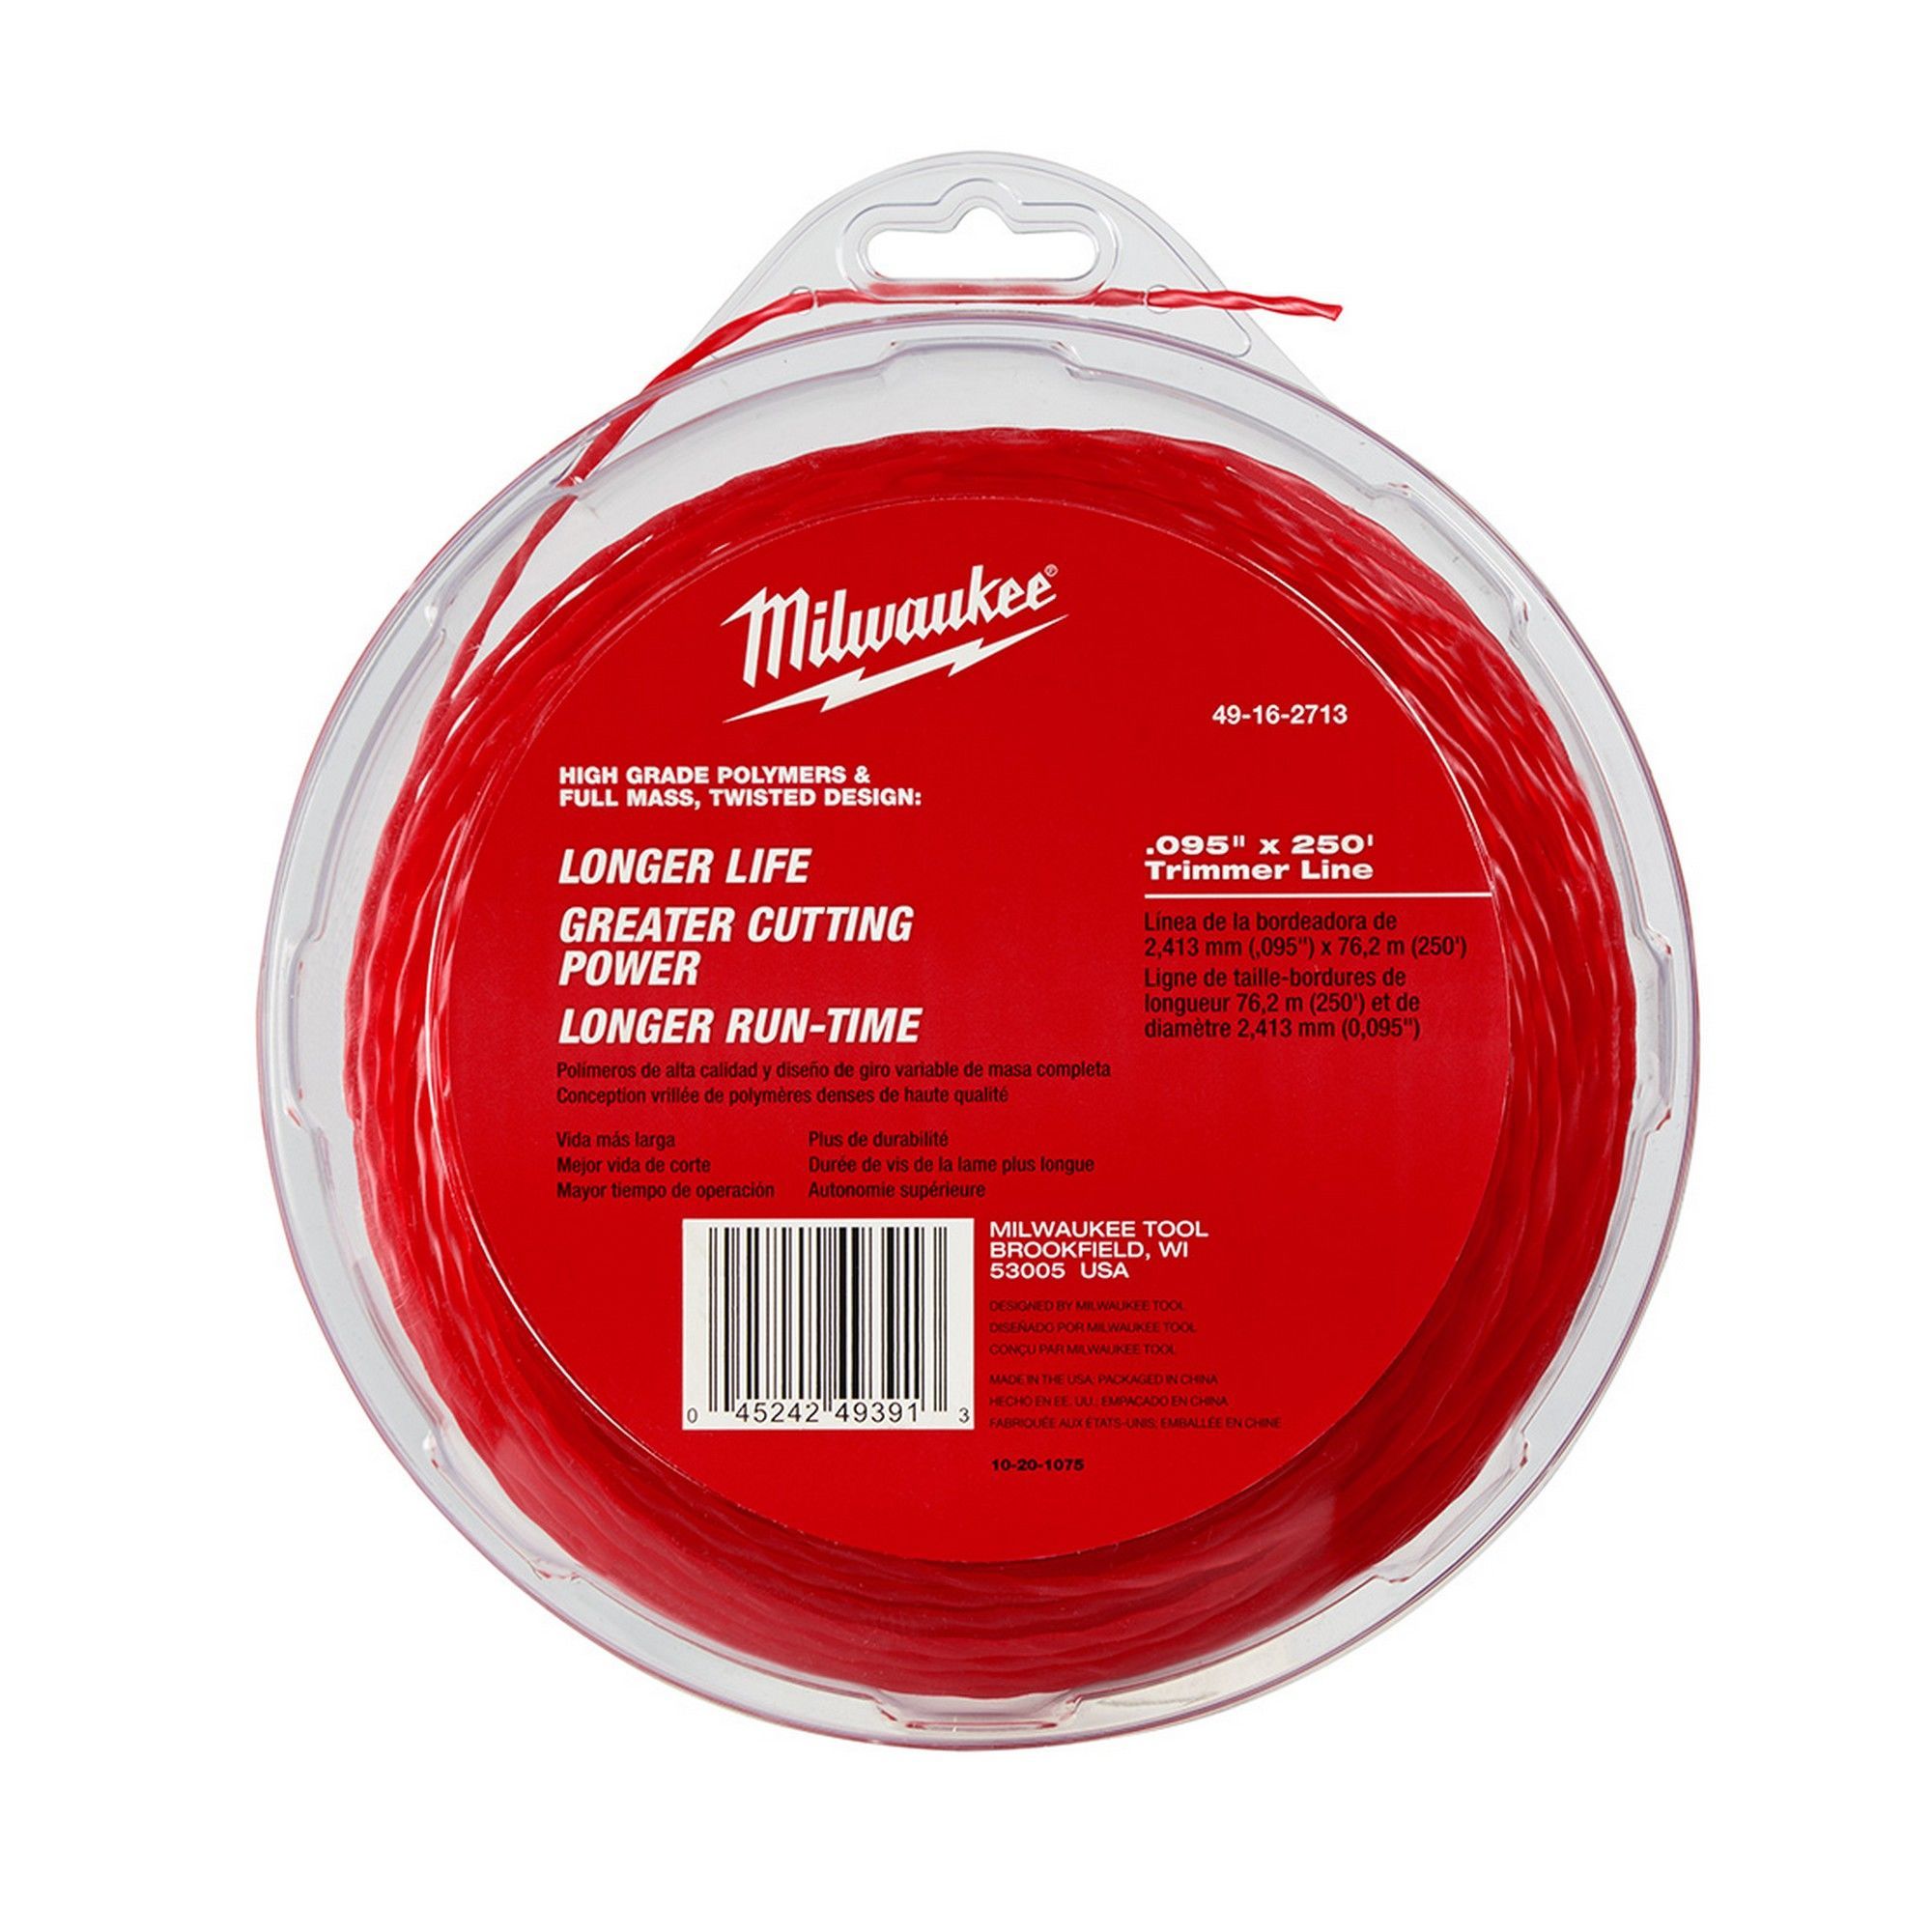 Replacement Trimmer Line - .095 x 250' from MILWAUKEE